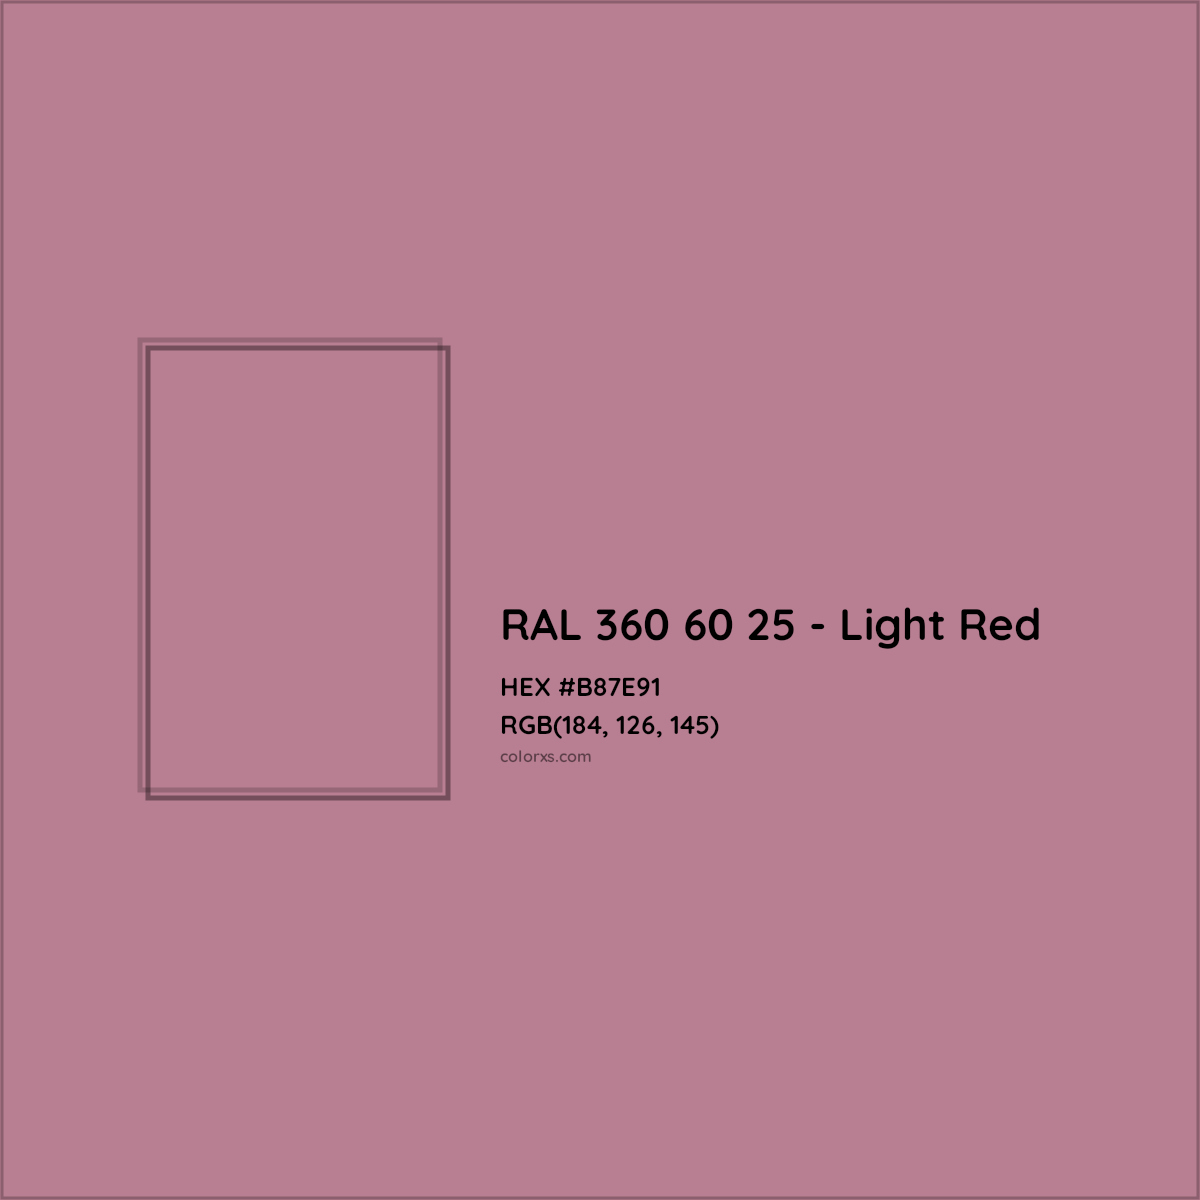 HEX #B87E91 RAL 360 60 25 - Light Red CMS RAL Design - Color Code